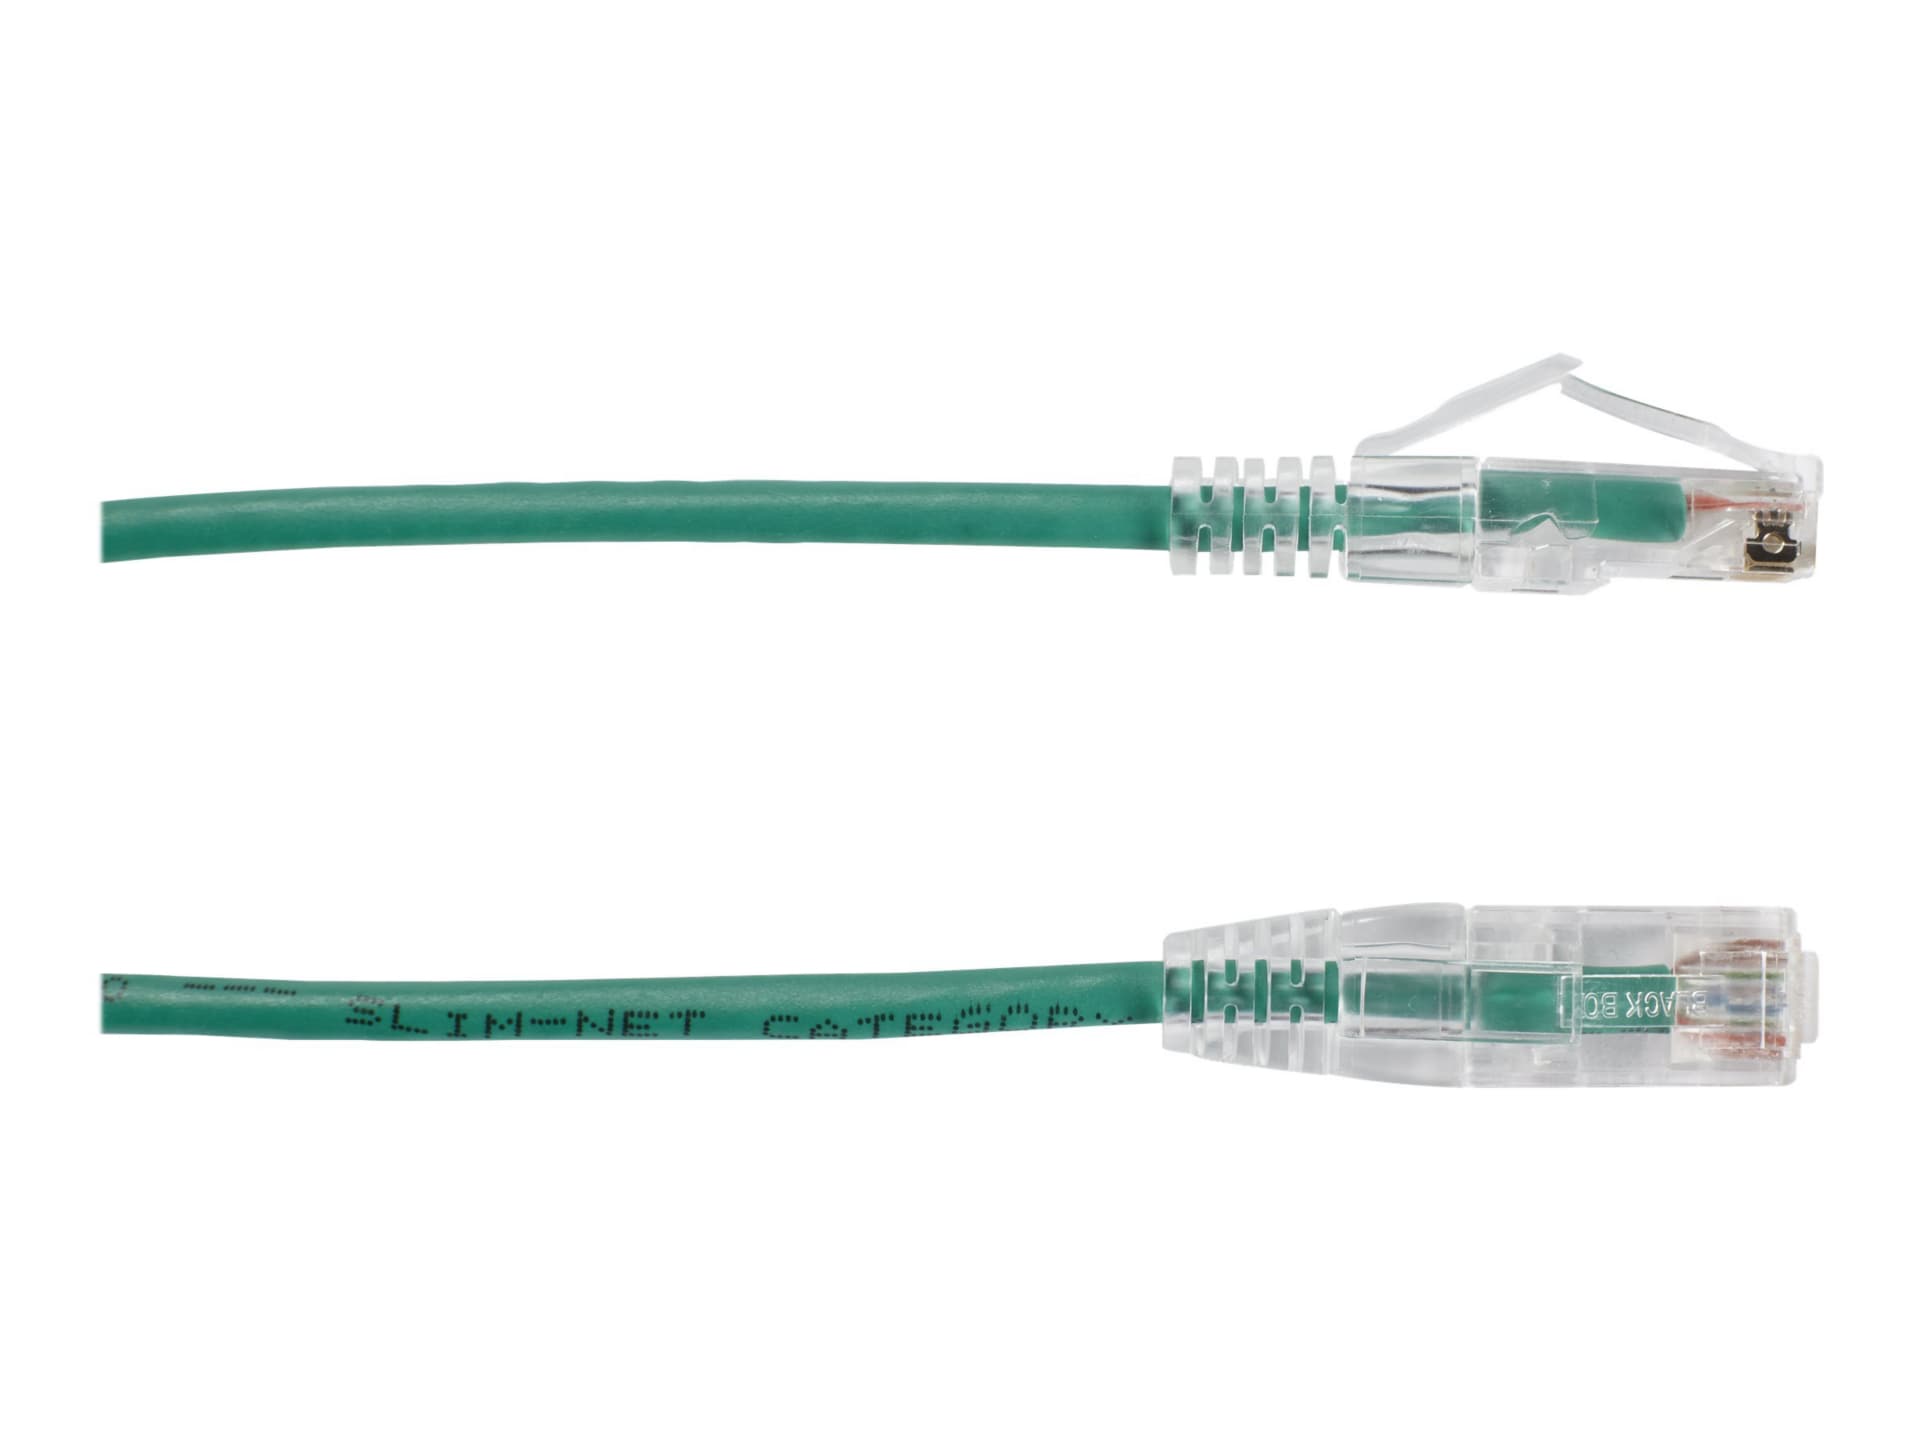 Black Box Slim-Net patch cable - 12 ft - green